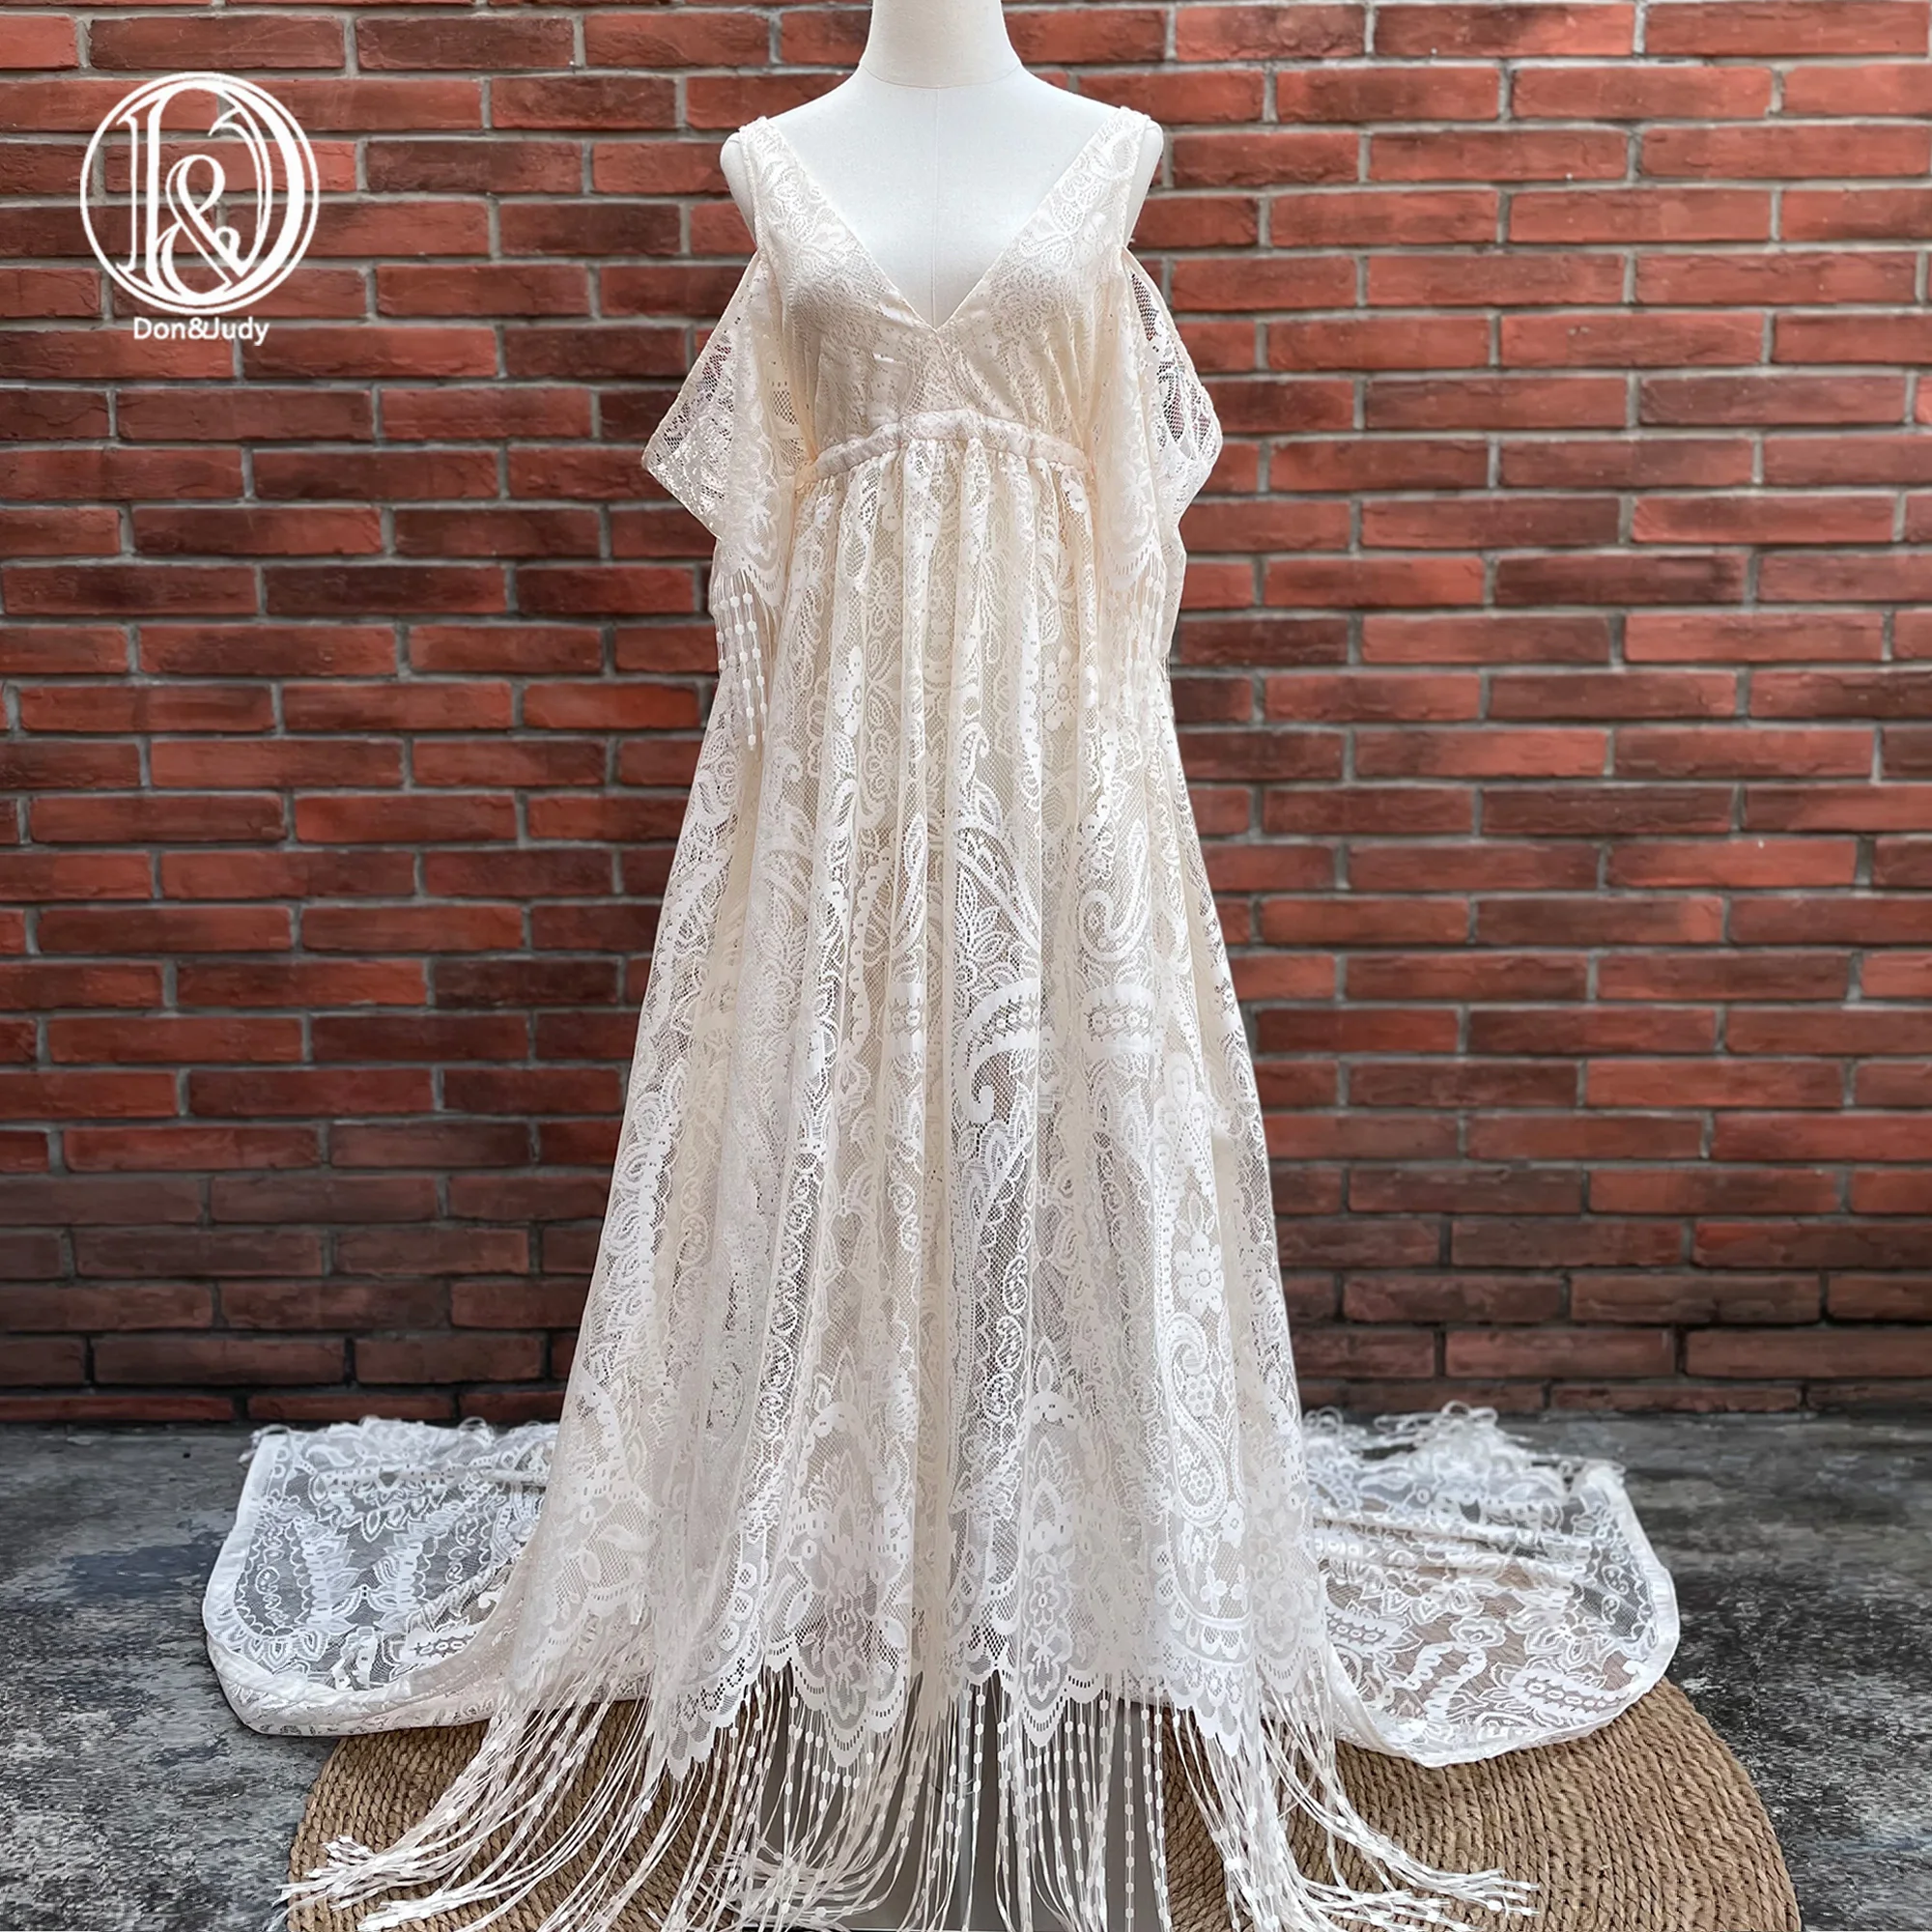 Don&Judy Deep V Lace Super Long Tassels Maternity Dress Photo Shoot Pregnant Woman Photography Drop Shoulder Gown Party Clothes